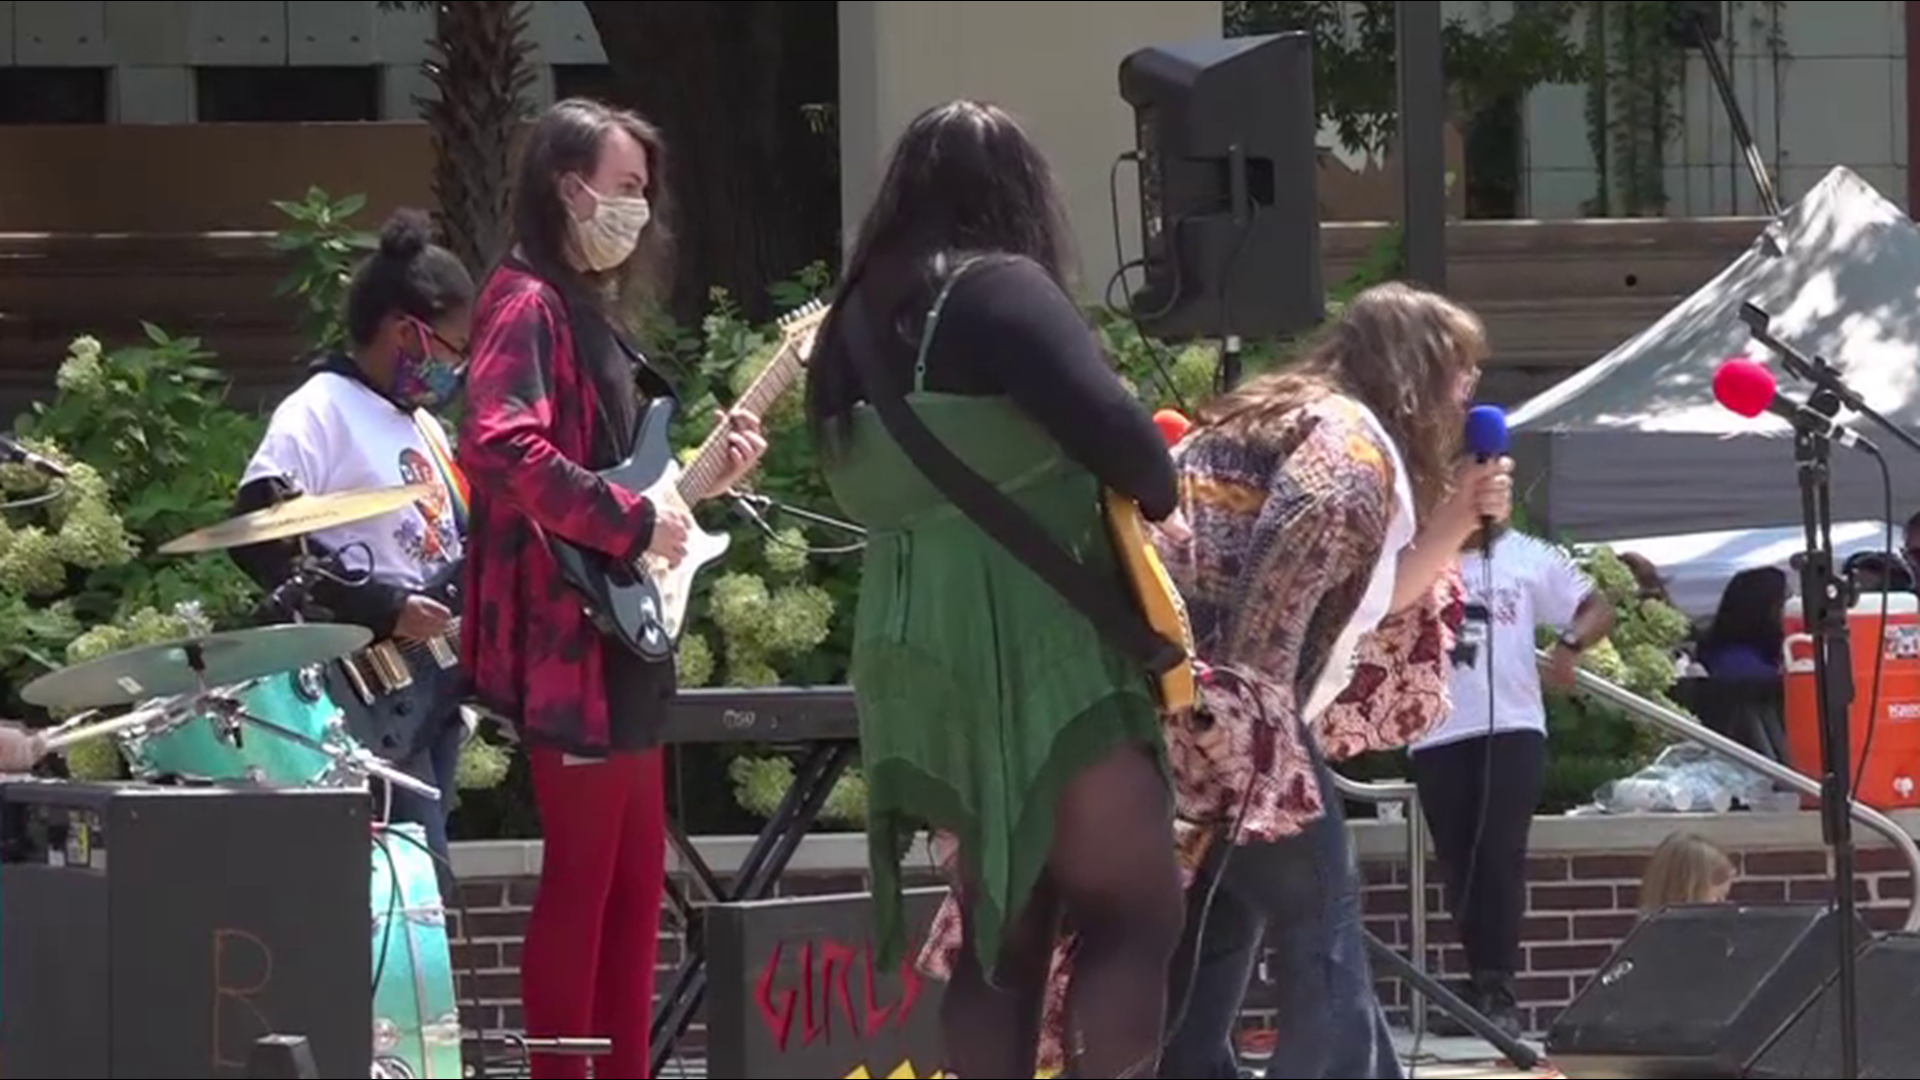 A summer camp for girls and trans youth taught lessons about self-confidence, feminism, and rocking out.